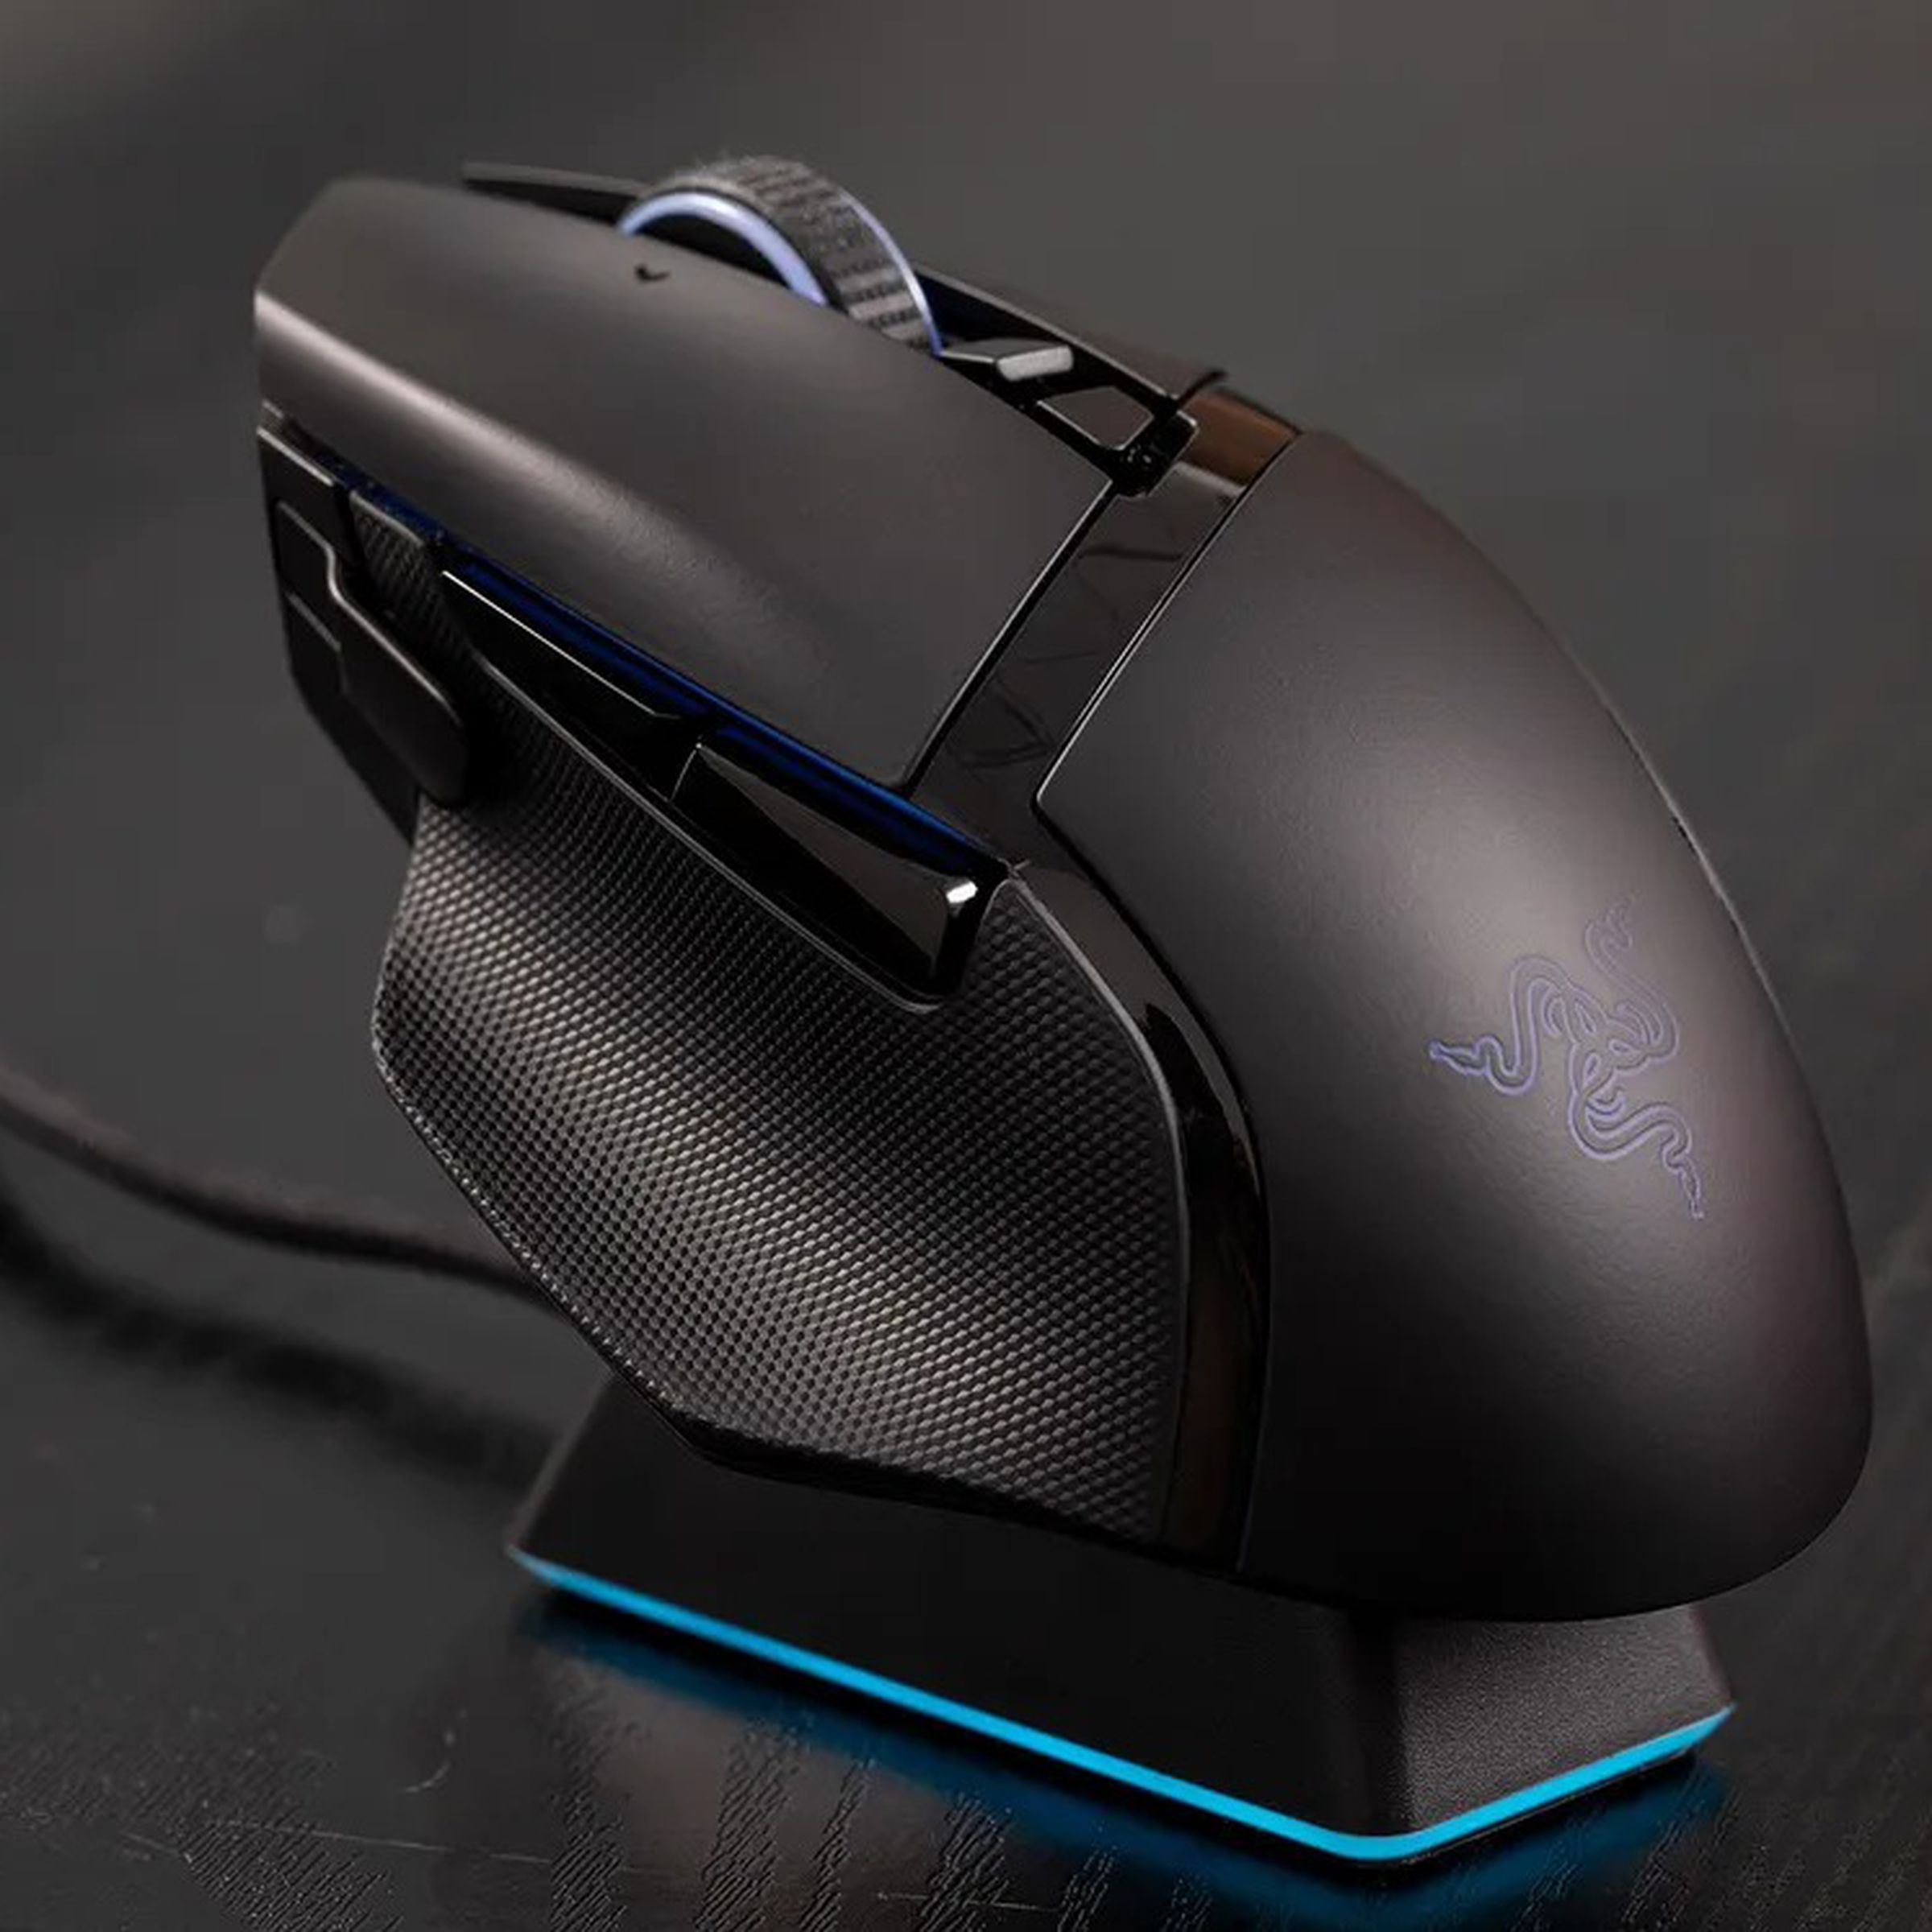 The Razer Basilisk Ultimate is just one of many big sales in today’s roundup